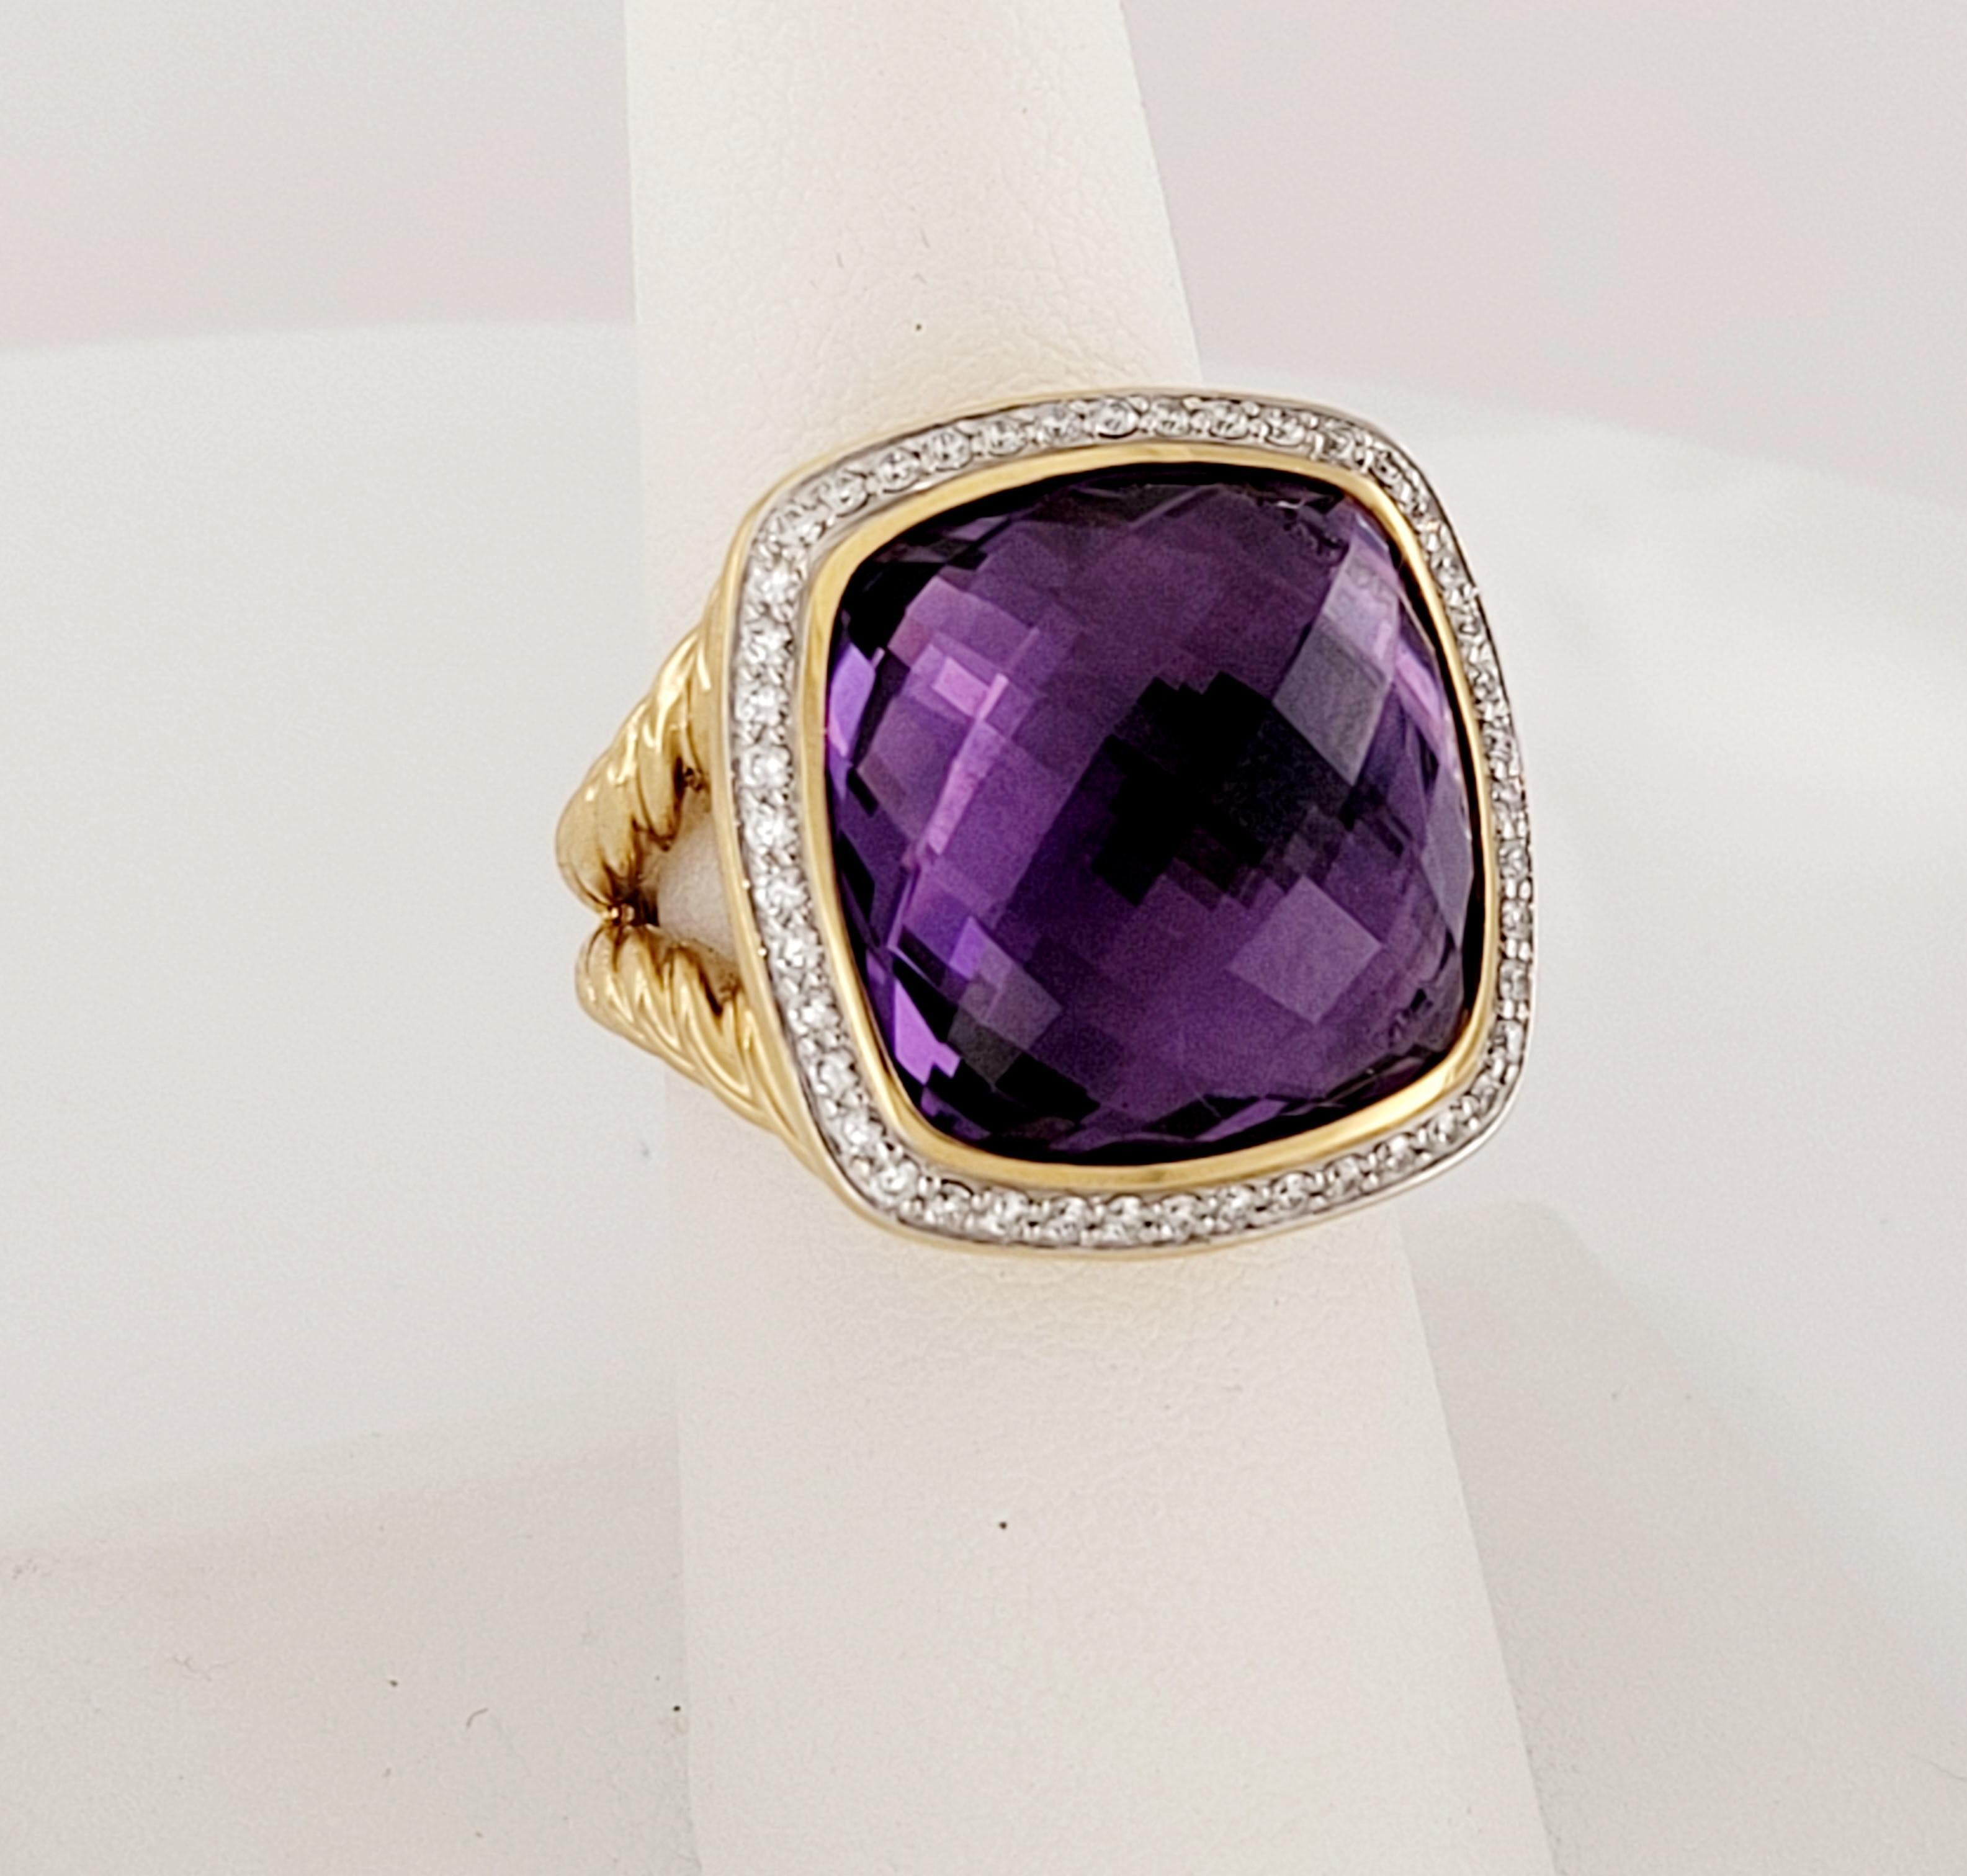 David Yurman Albion Ring with Amethyst and Diamonds in 18k Gold 1